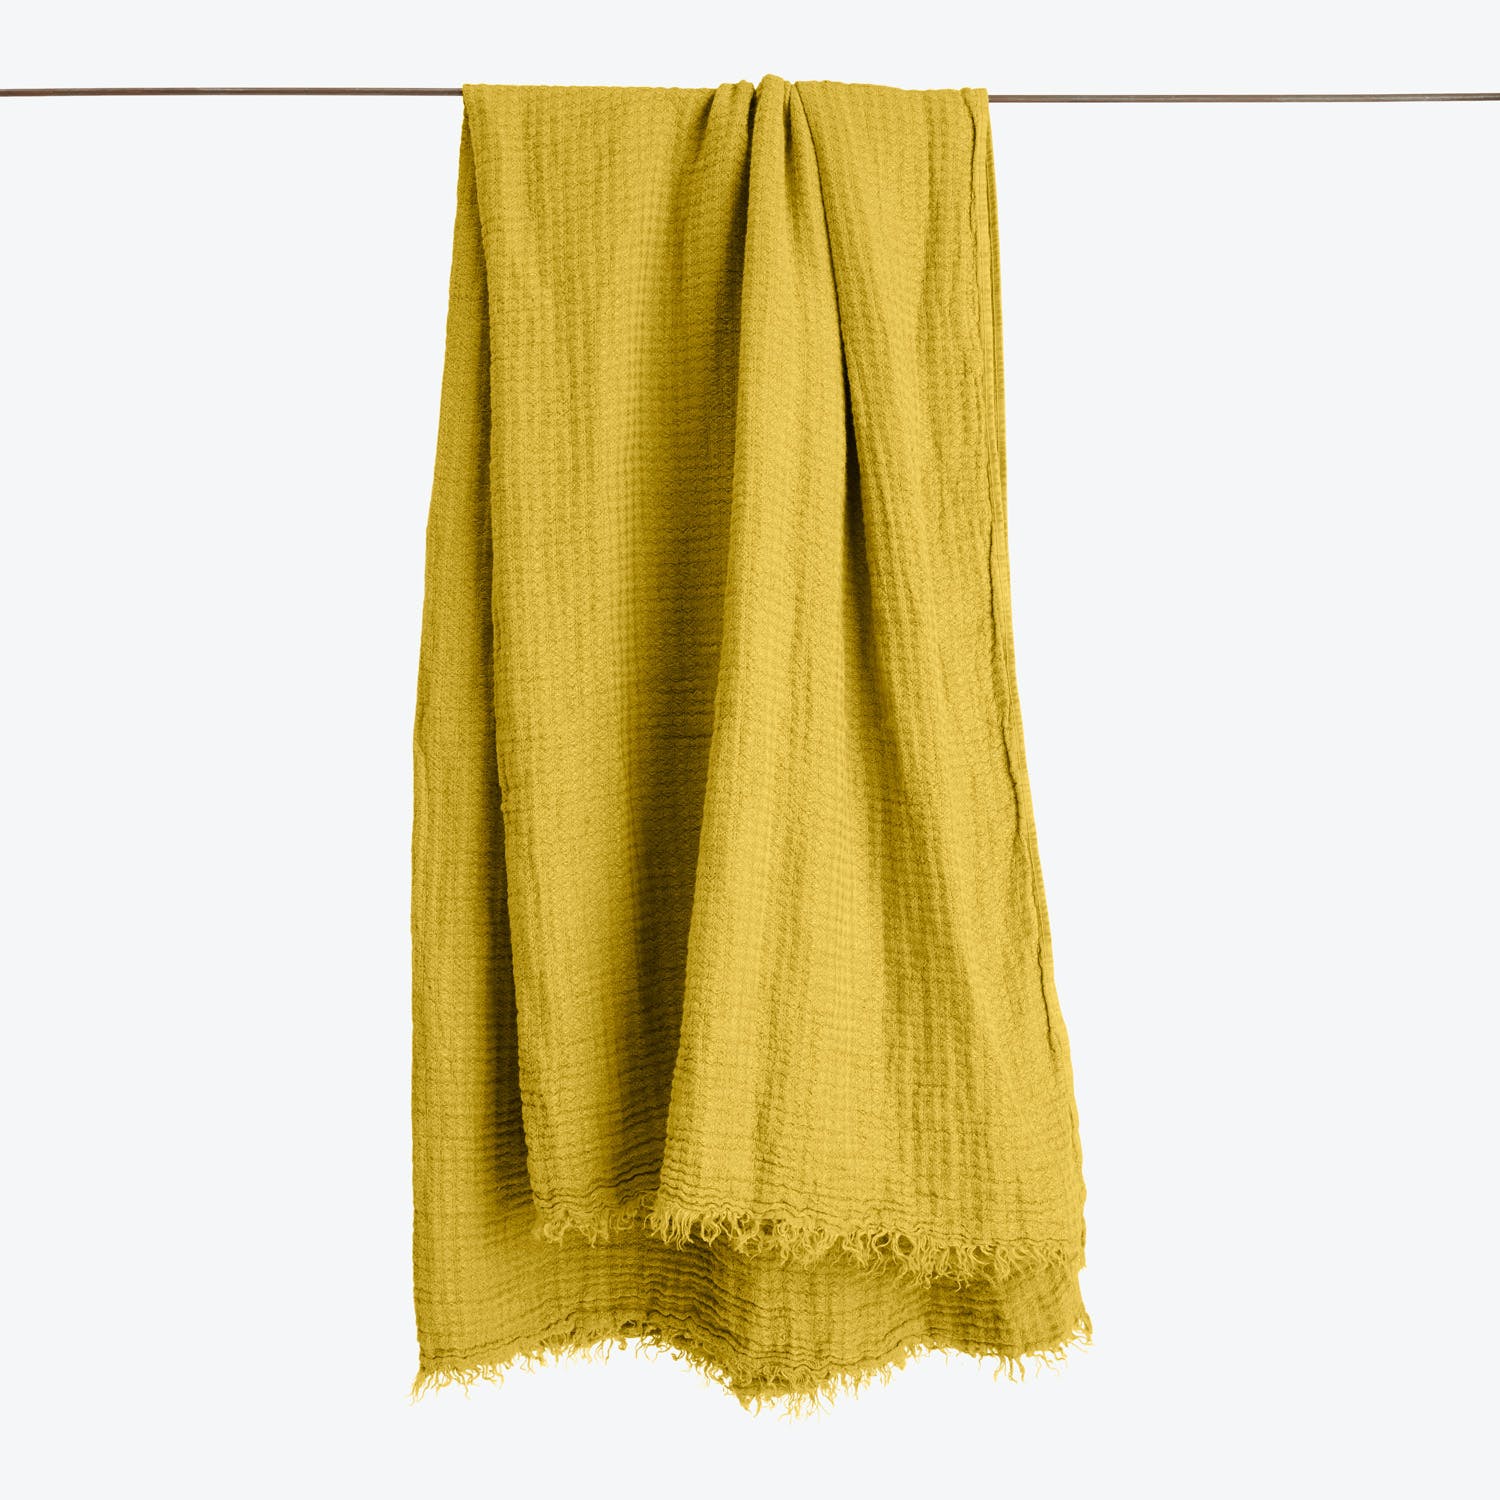 Mustard yellow fabric with a loose weave and frayed edge.